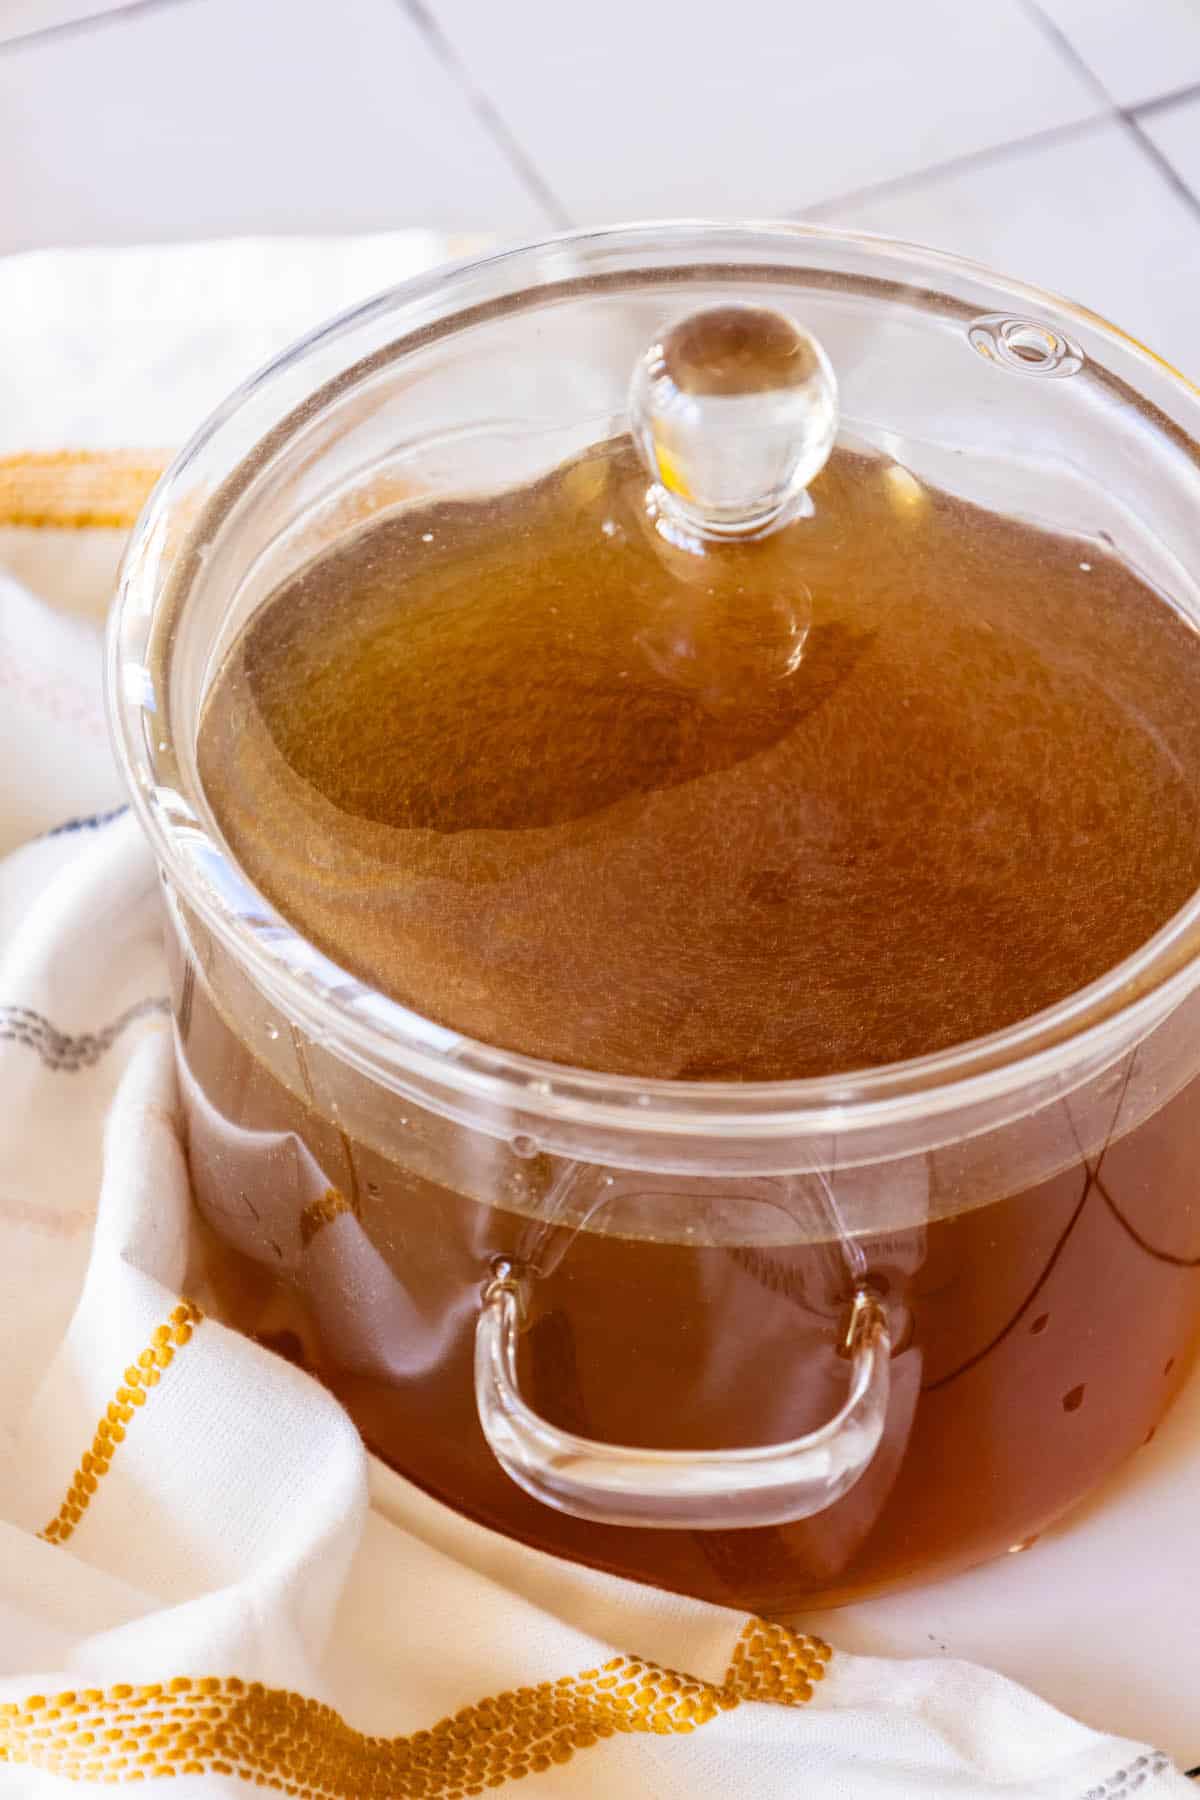 A glass pot with brown liquid on top of a white towel.